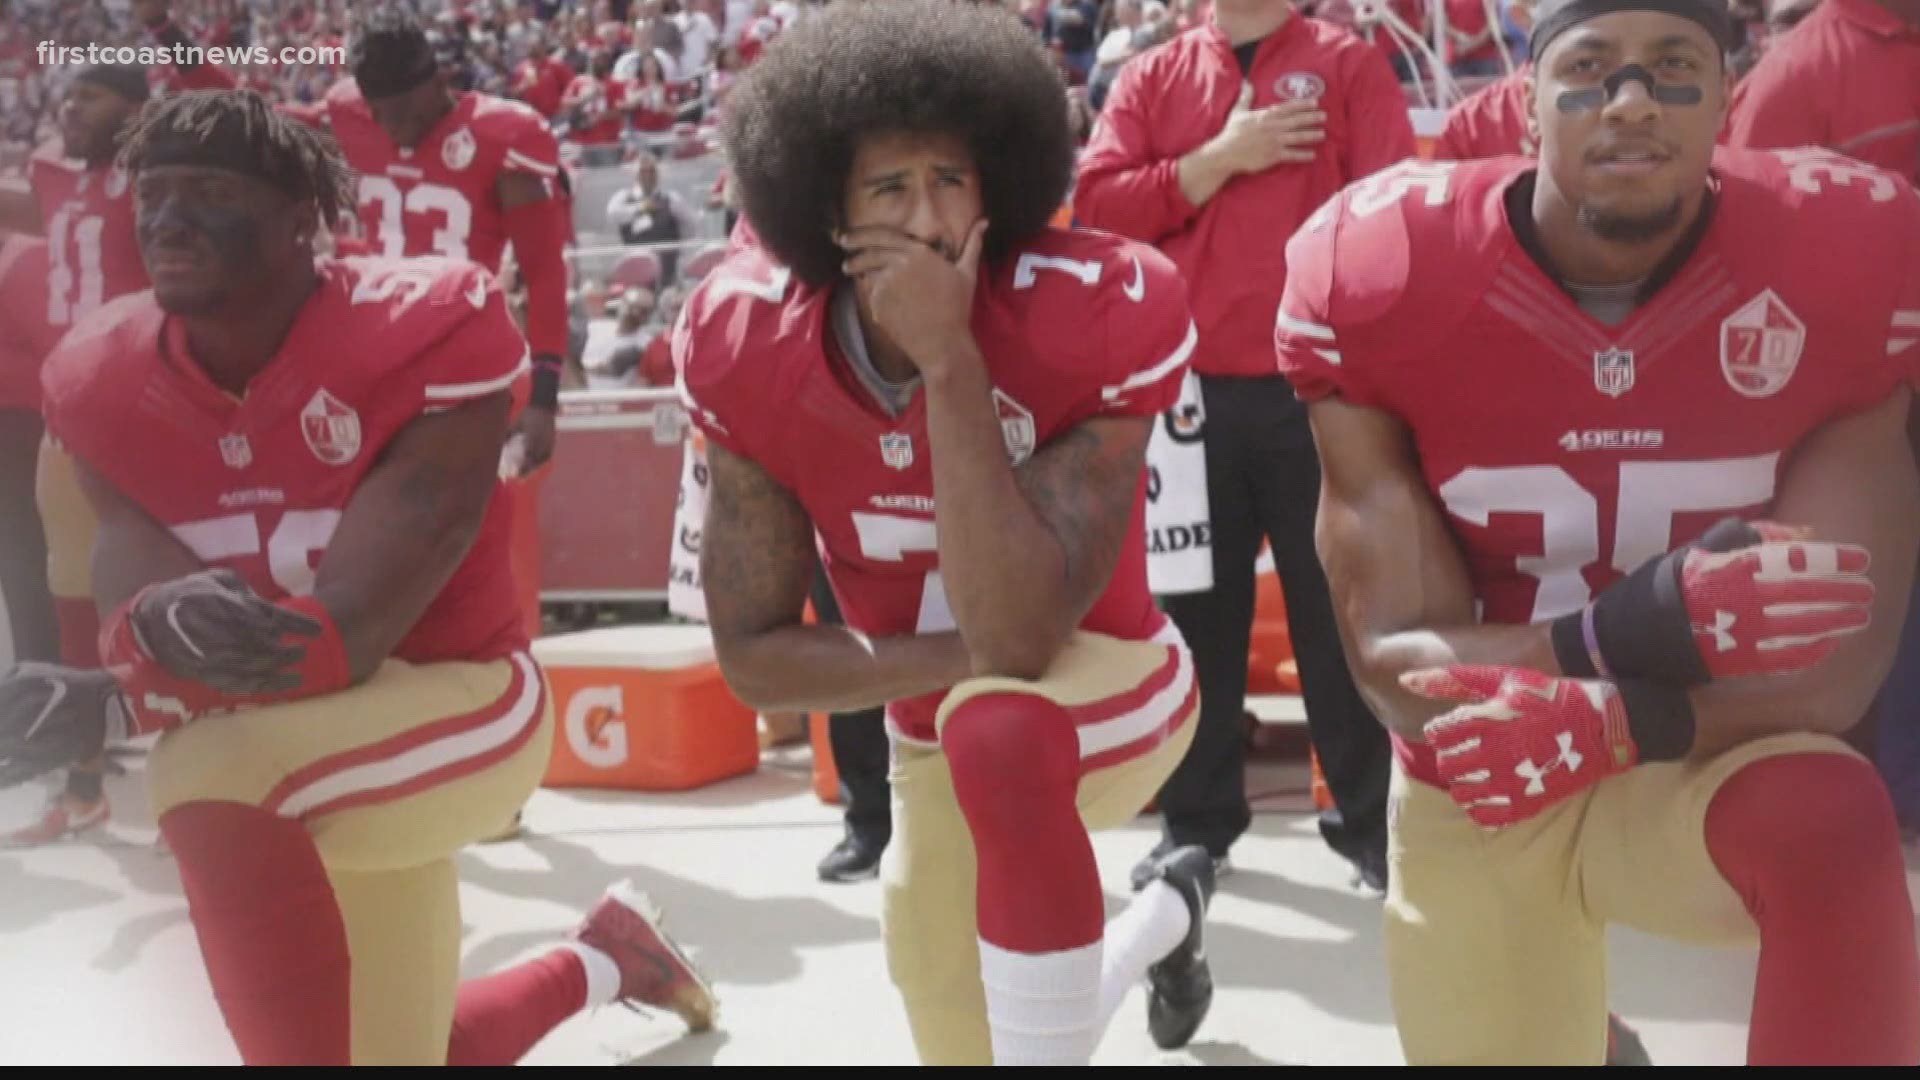 "I am not going to stand up to show pride in a flag for a country that oppresses black people and people of color," Kaepernick once told the NFL.